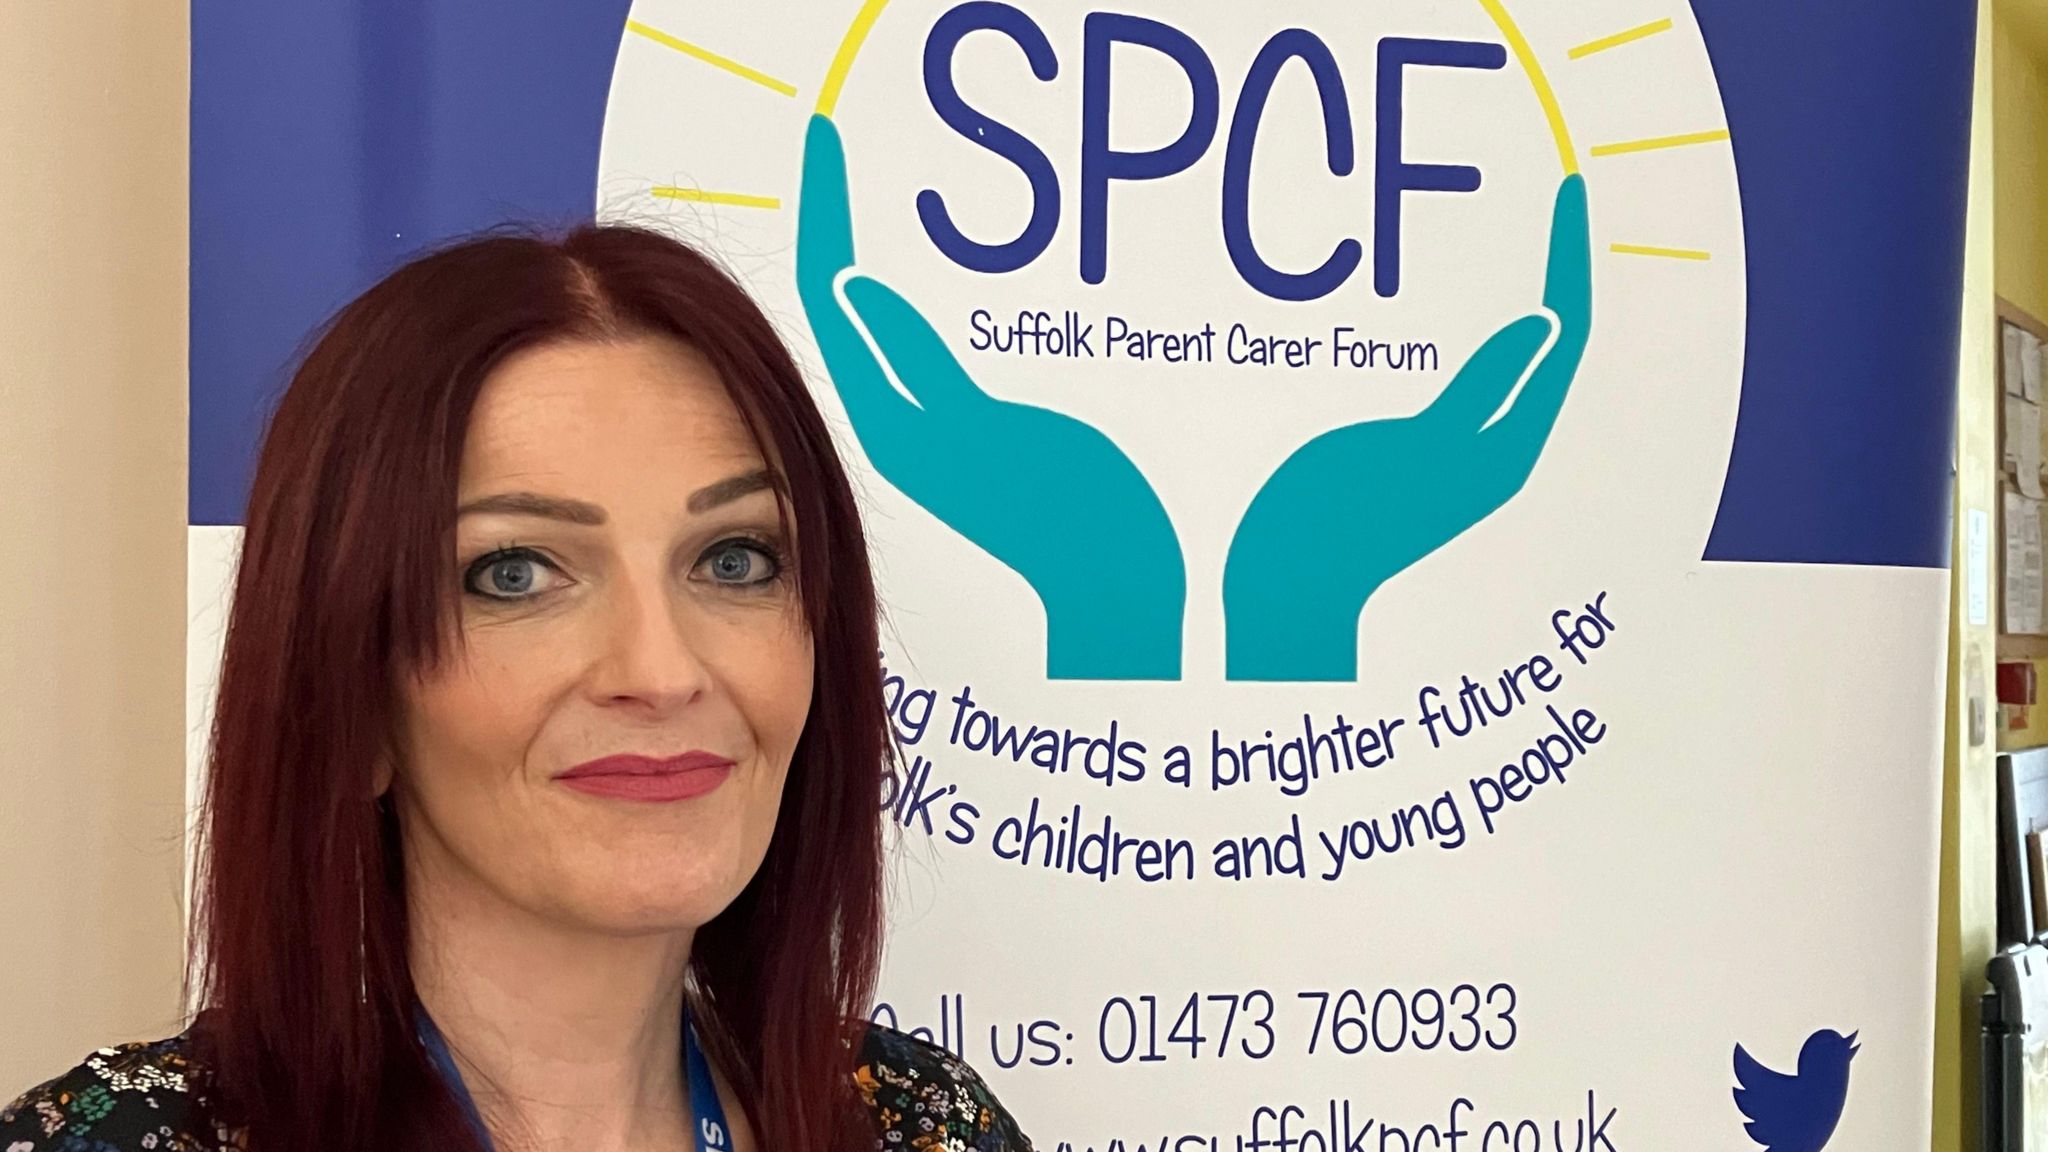 Person with carmine-coloured hair standing in front of sign saying Suffolk Parent Carer Forum